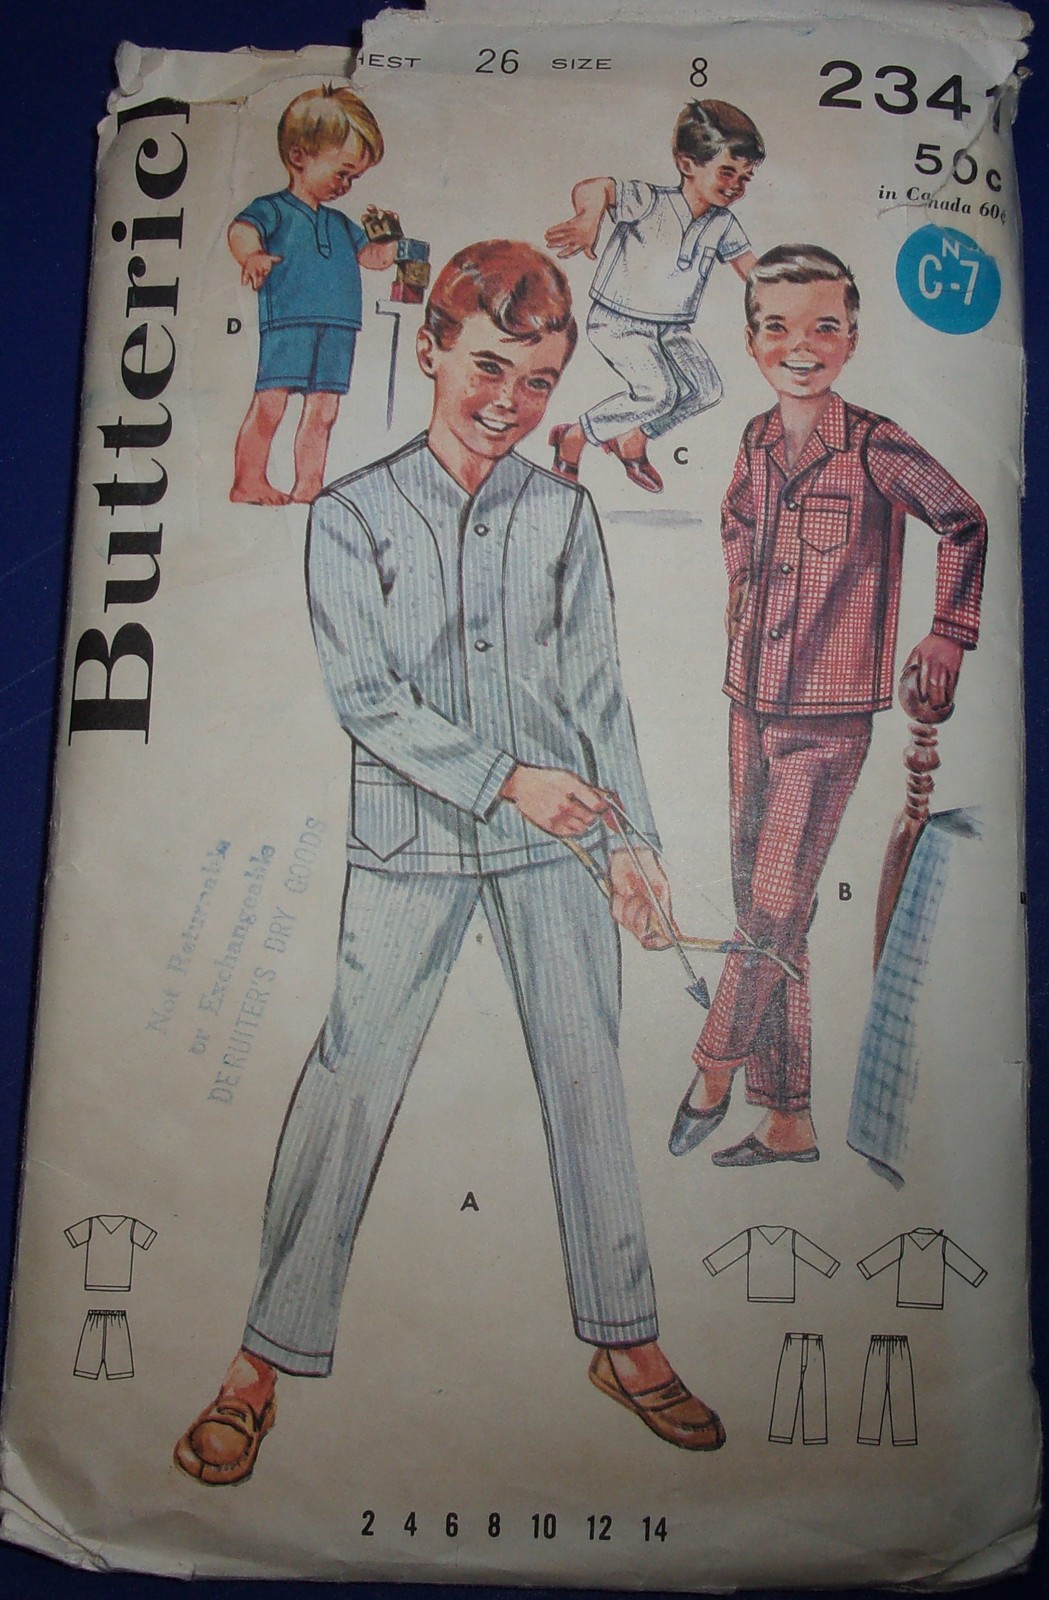 Primary image for Butterick Boys’ Tailored Pajamas Size 8 #2342 